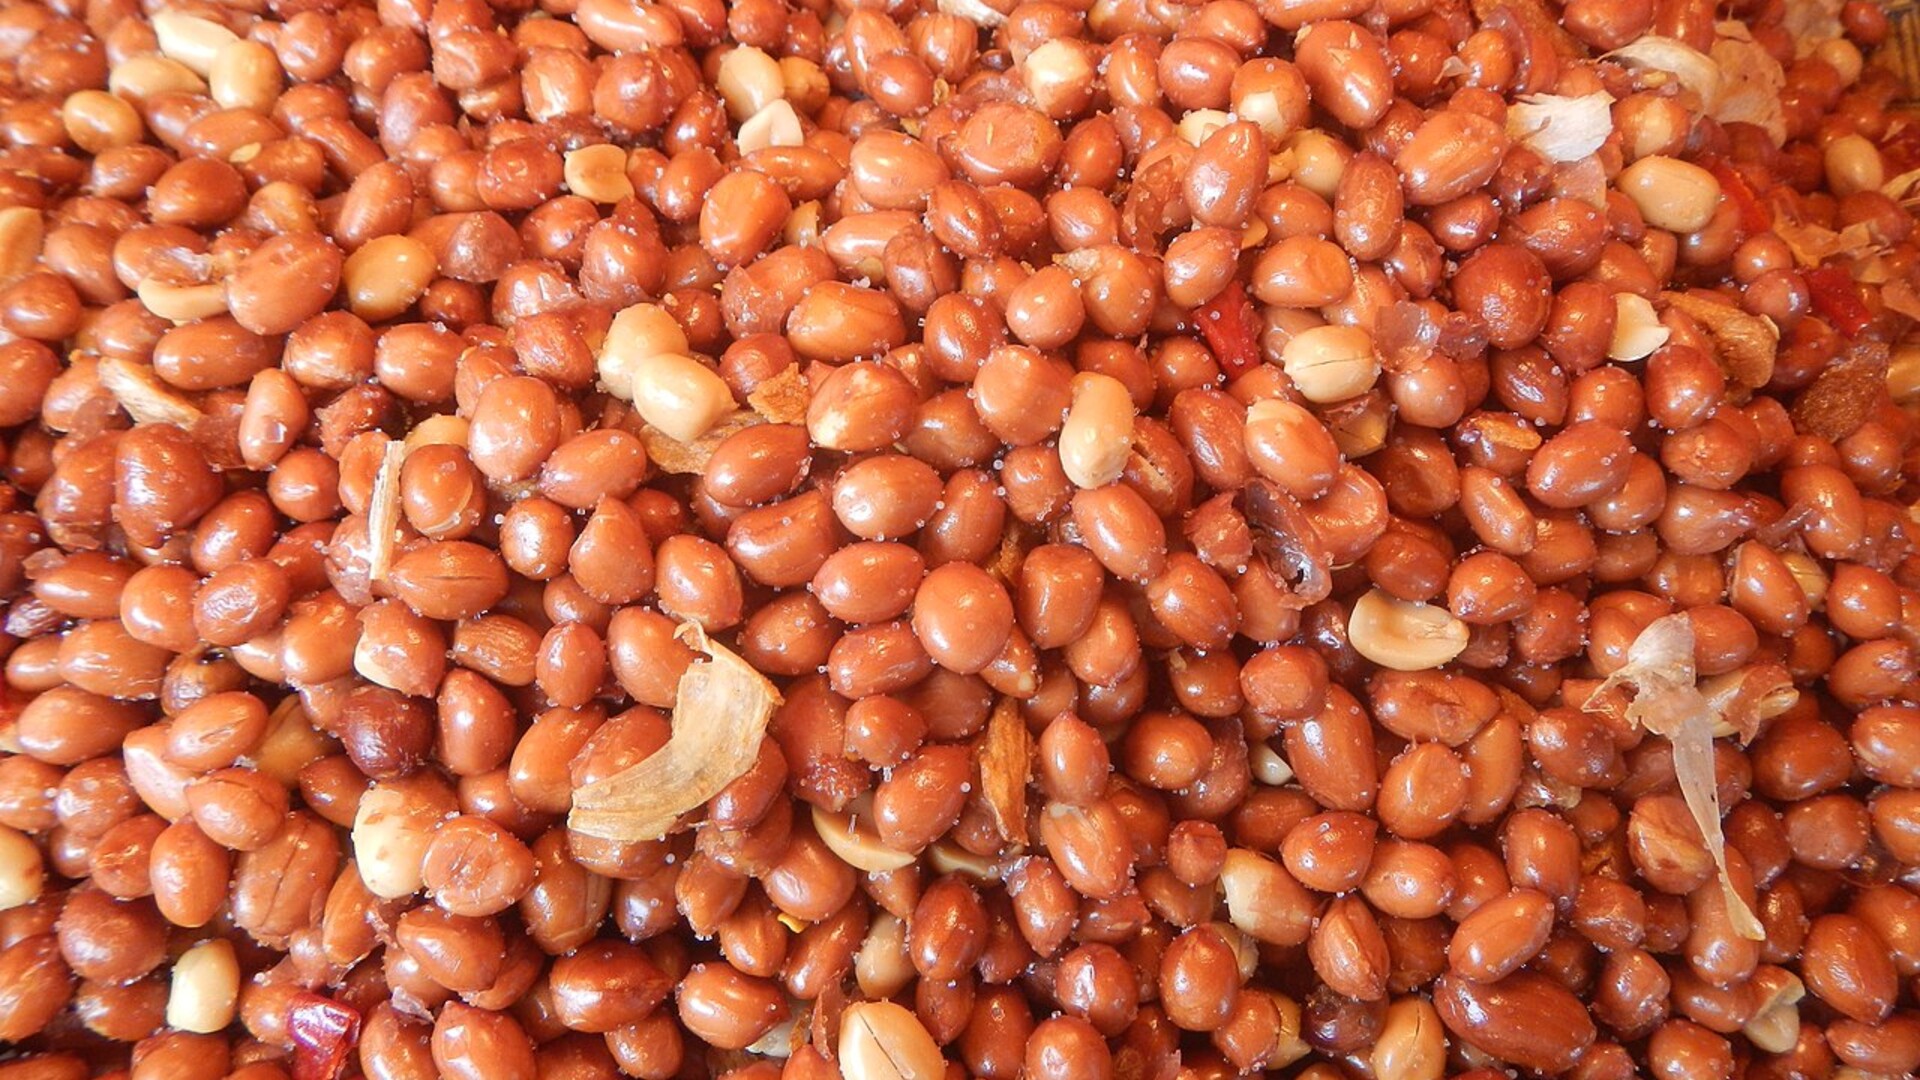 Peanuts to Compete for Acres